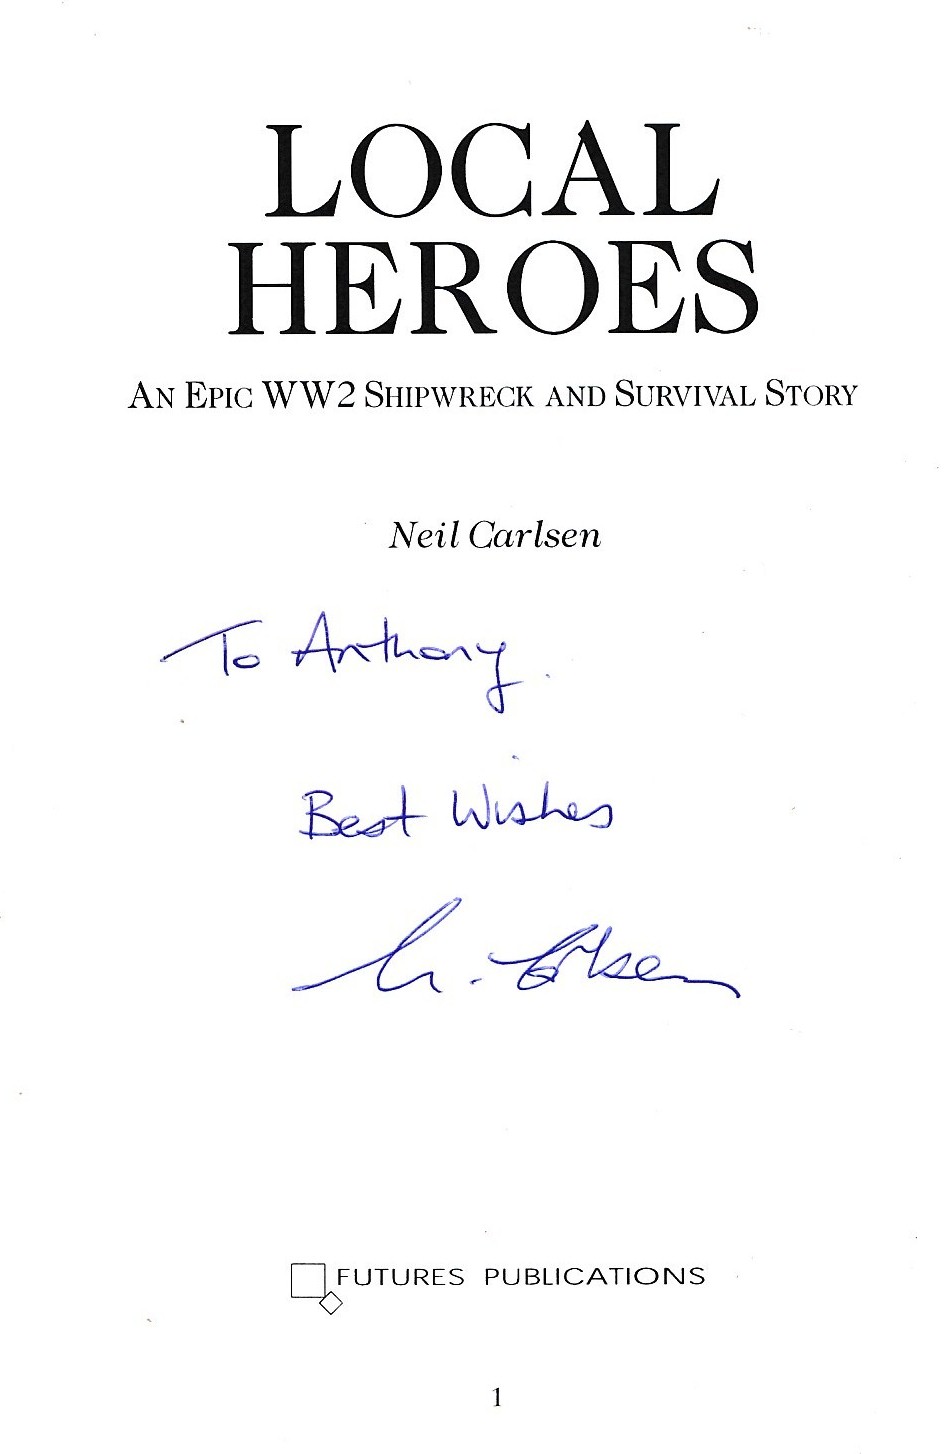 Local Heroes. An Epic WW2 Shipwreck and Survival Story. Signed copy.